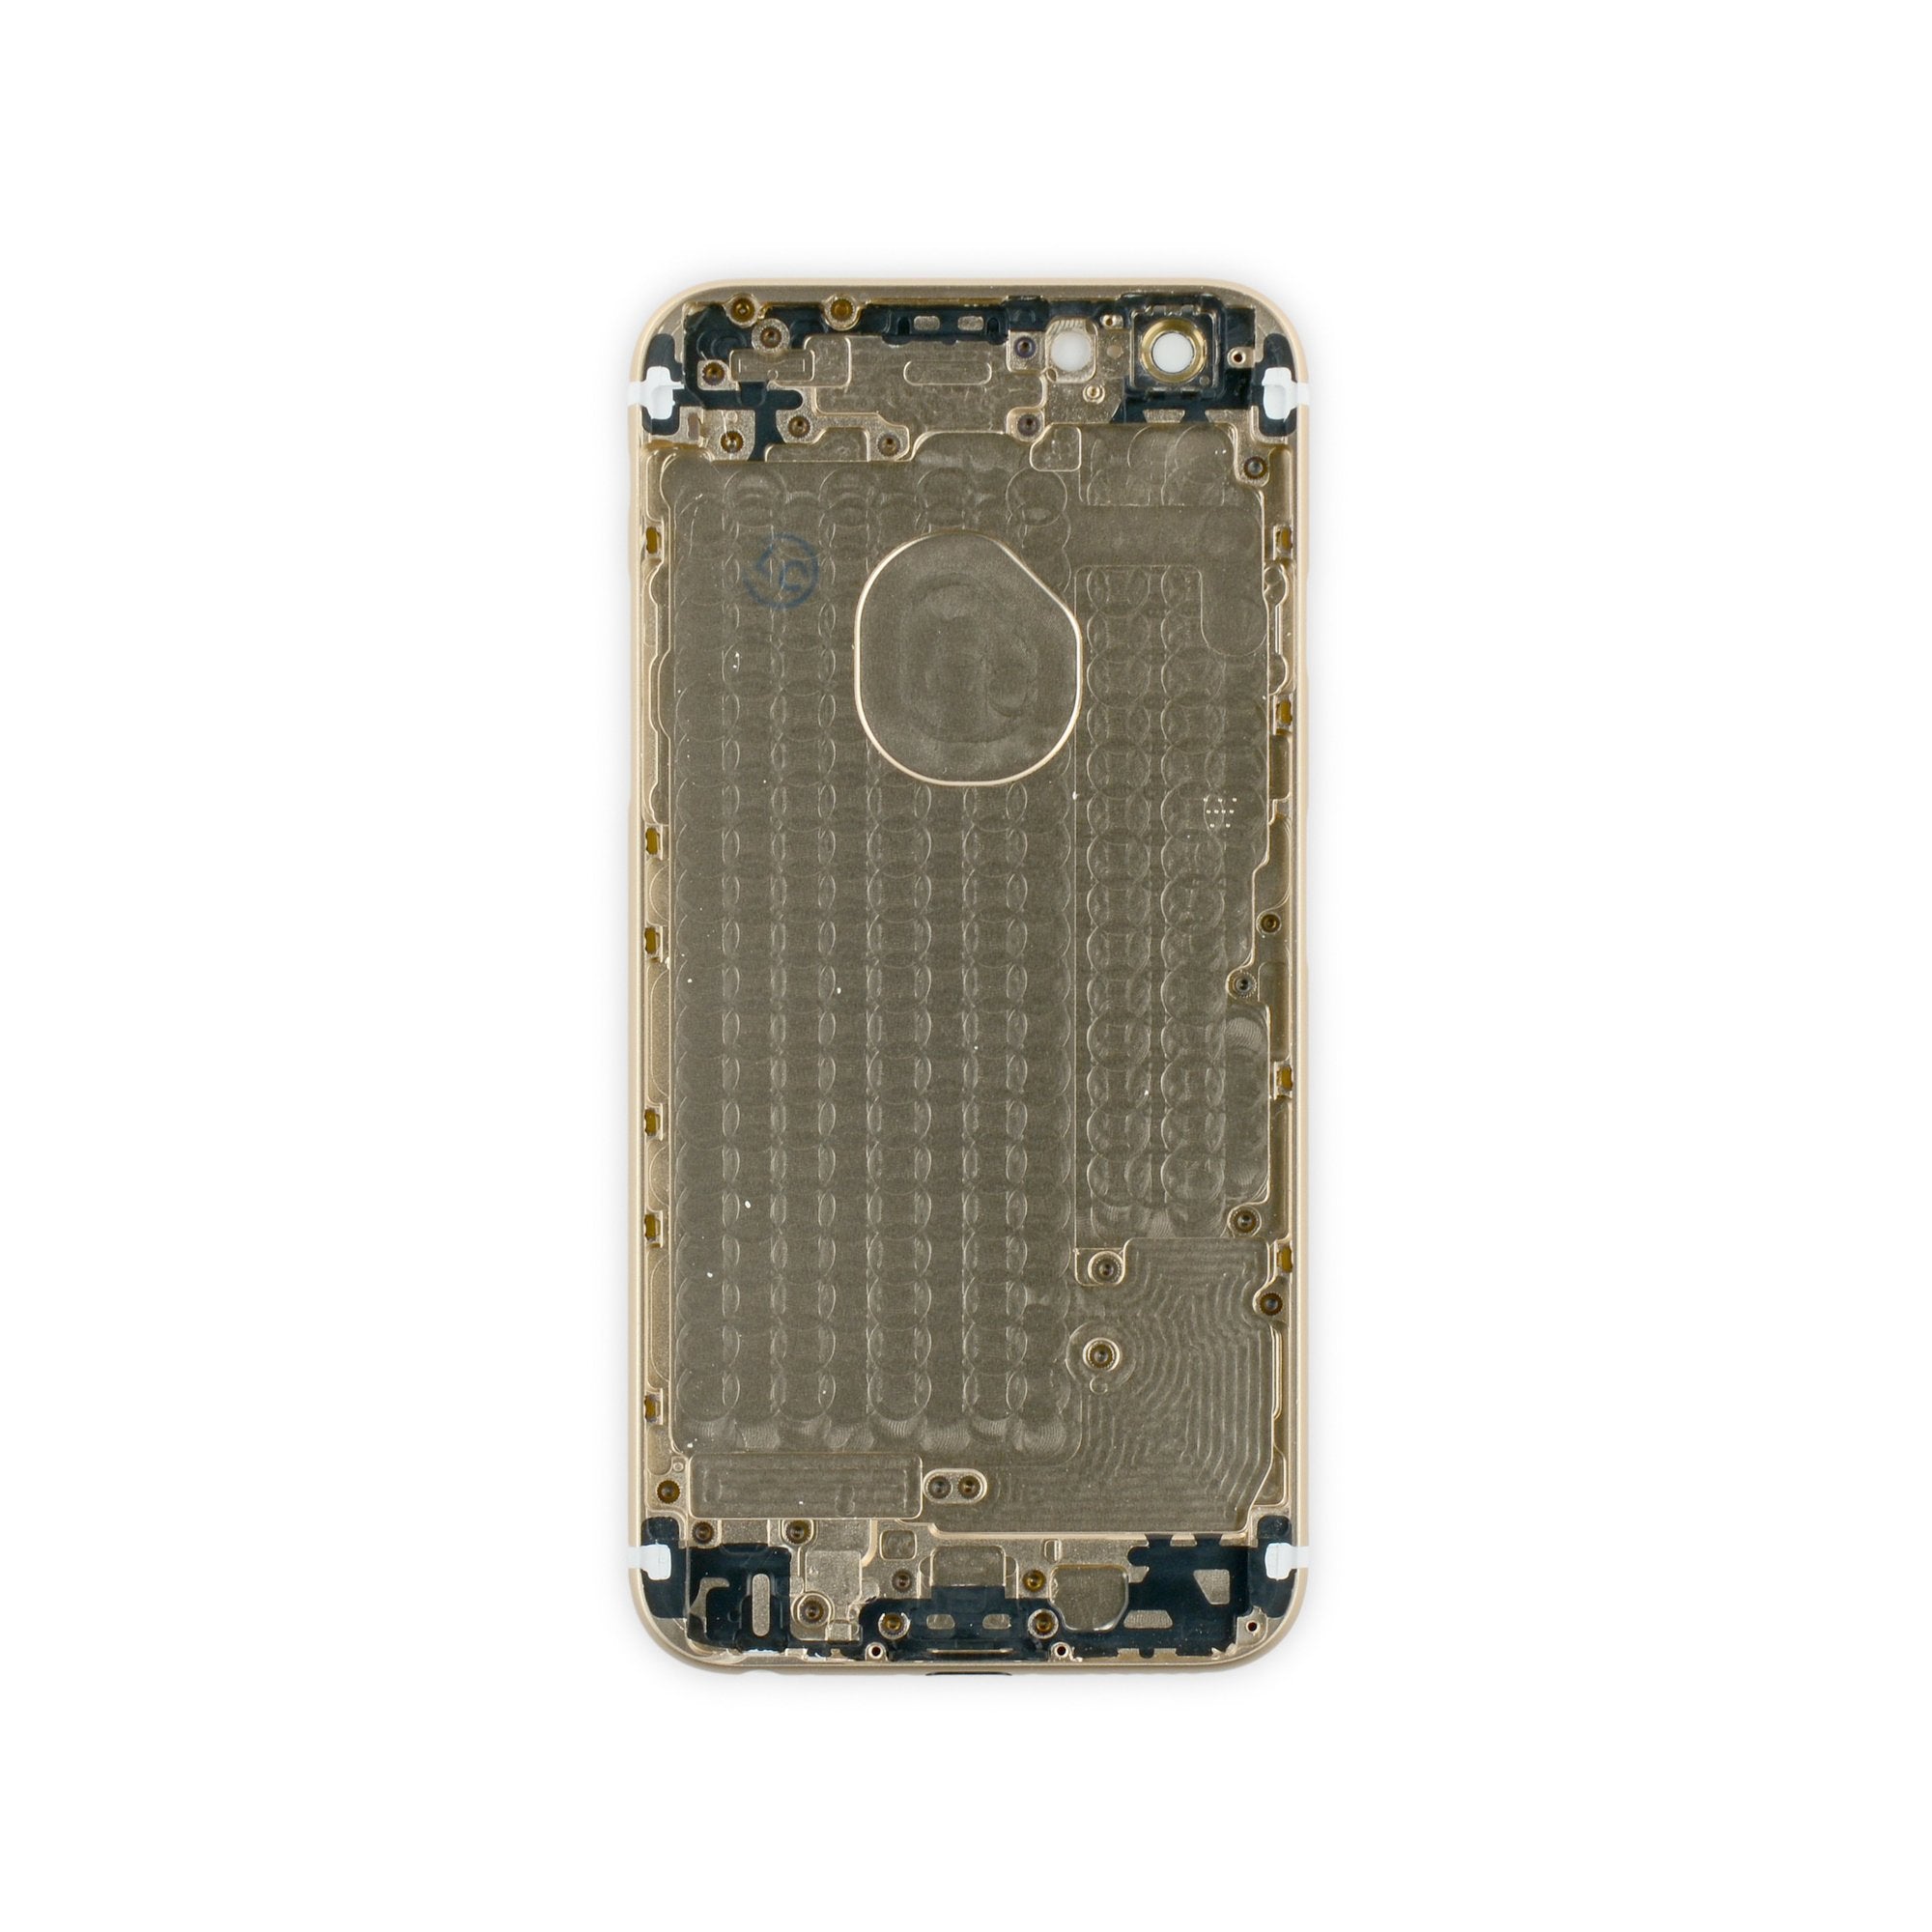 iPhone 6 Blank Rear Case Gold New